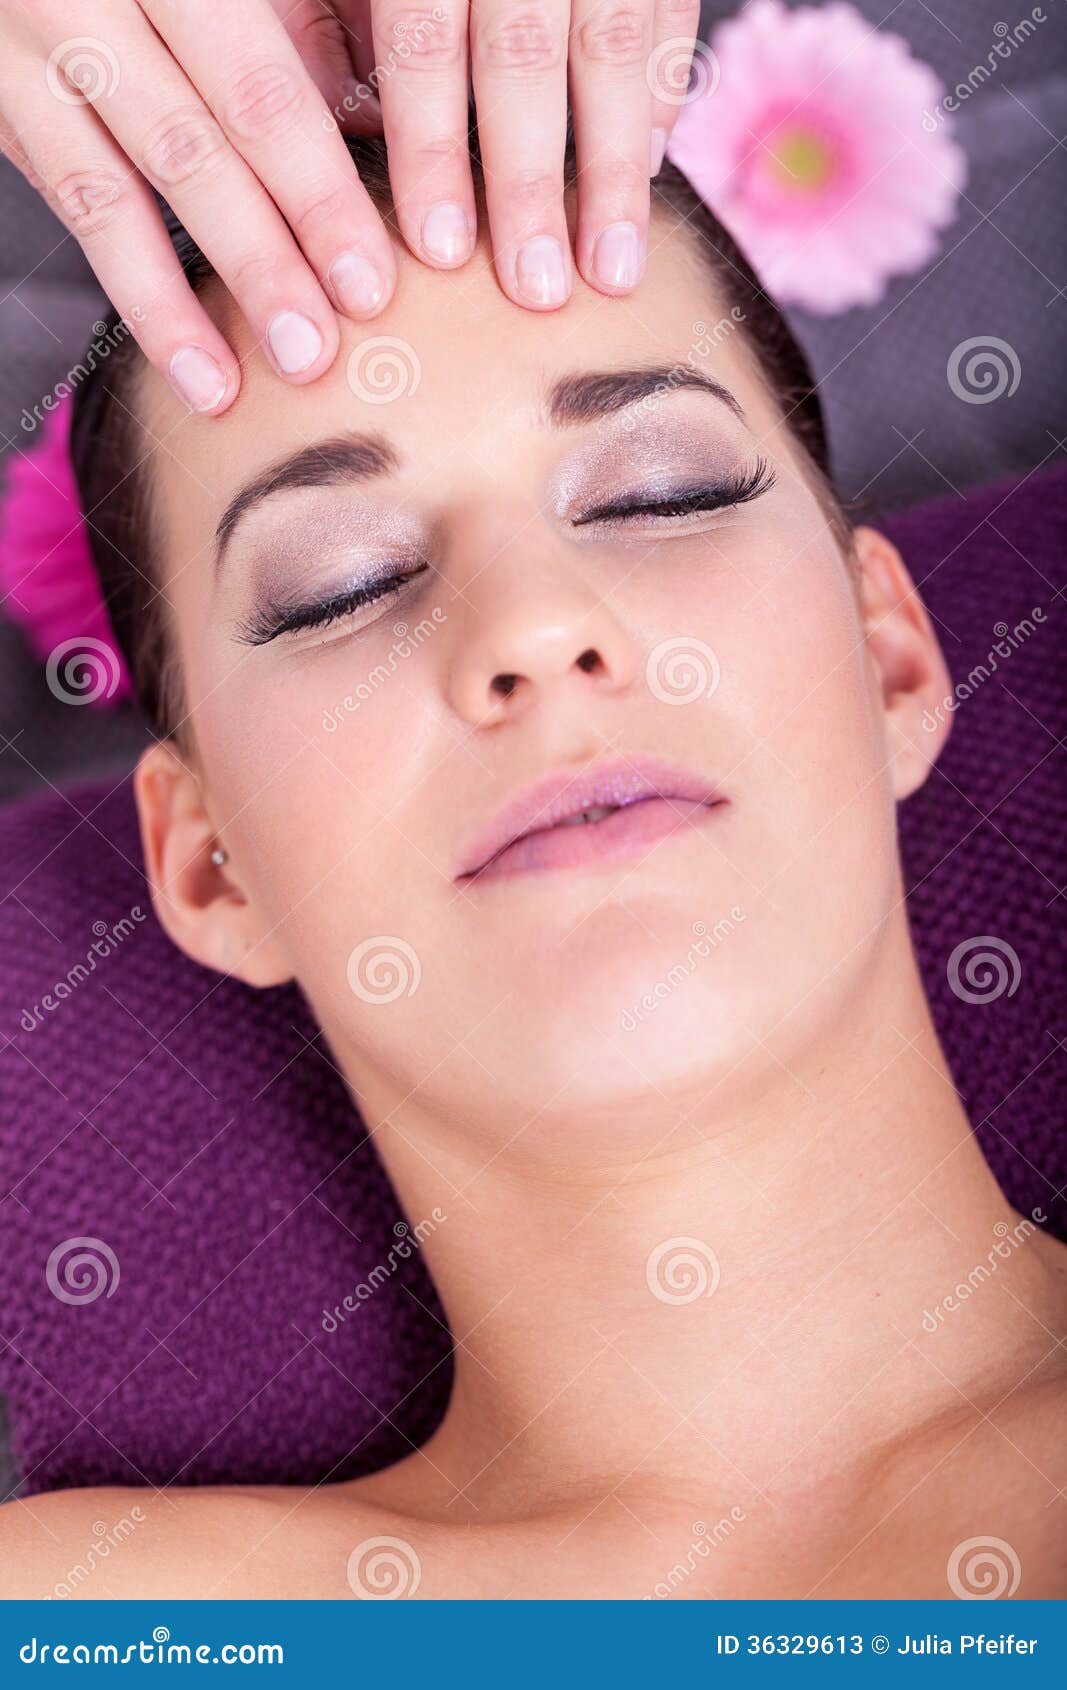 Woman Having A Relaxing Facial Massage Stock Image Image Of Bliss